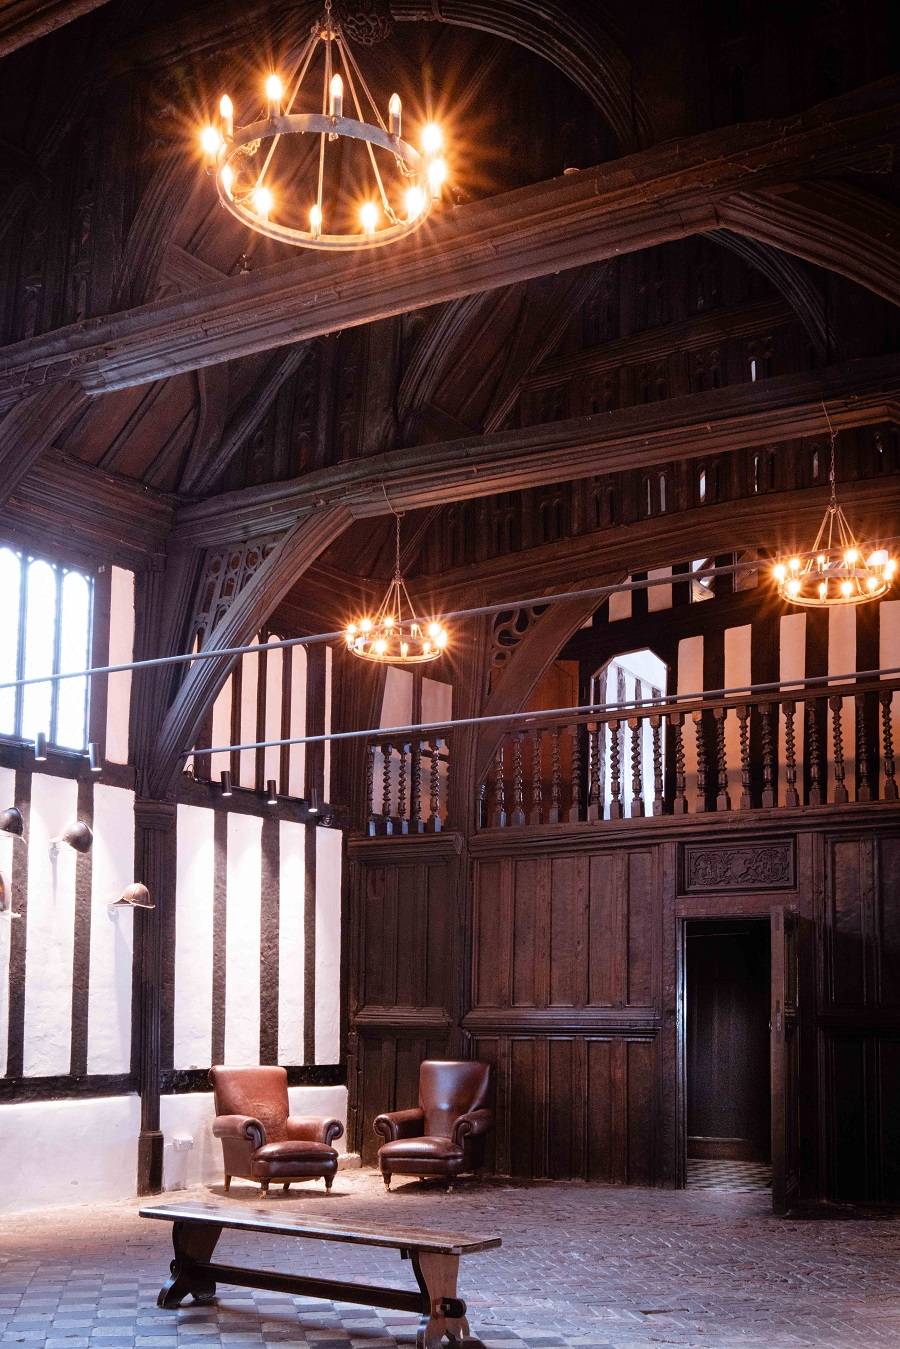 A photo of the interior of the Great Hall at The Commandery.